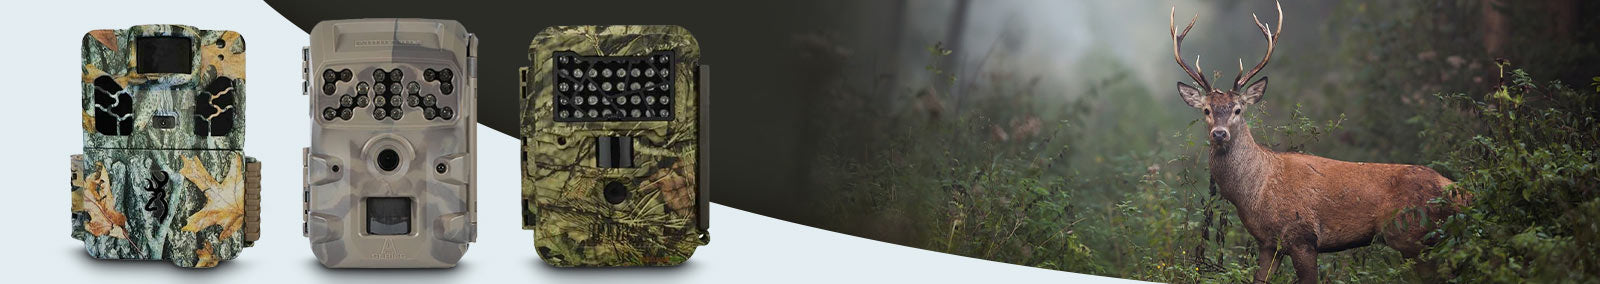 Best Browning Night Vision Trail Cameras (Rated & Reviewed 2020)